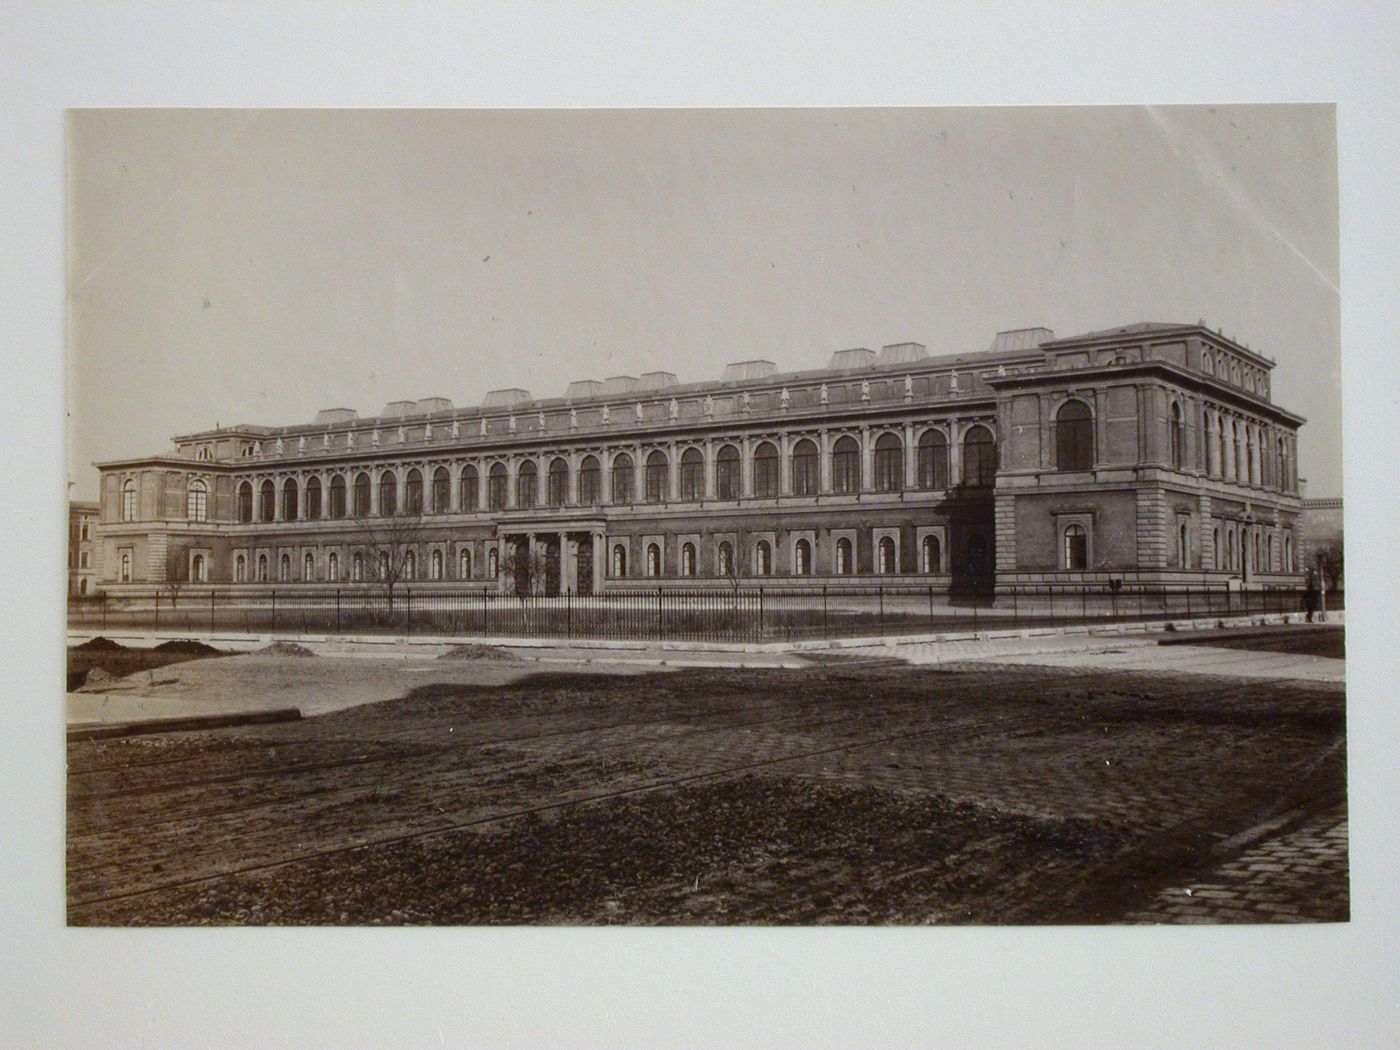 View of the principal façade of the Alte Pinakothek [Old Picture Gallery], Barerstrasse 27, Munich, Germany